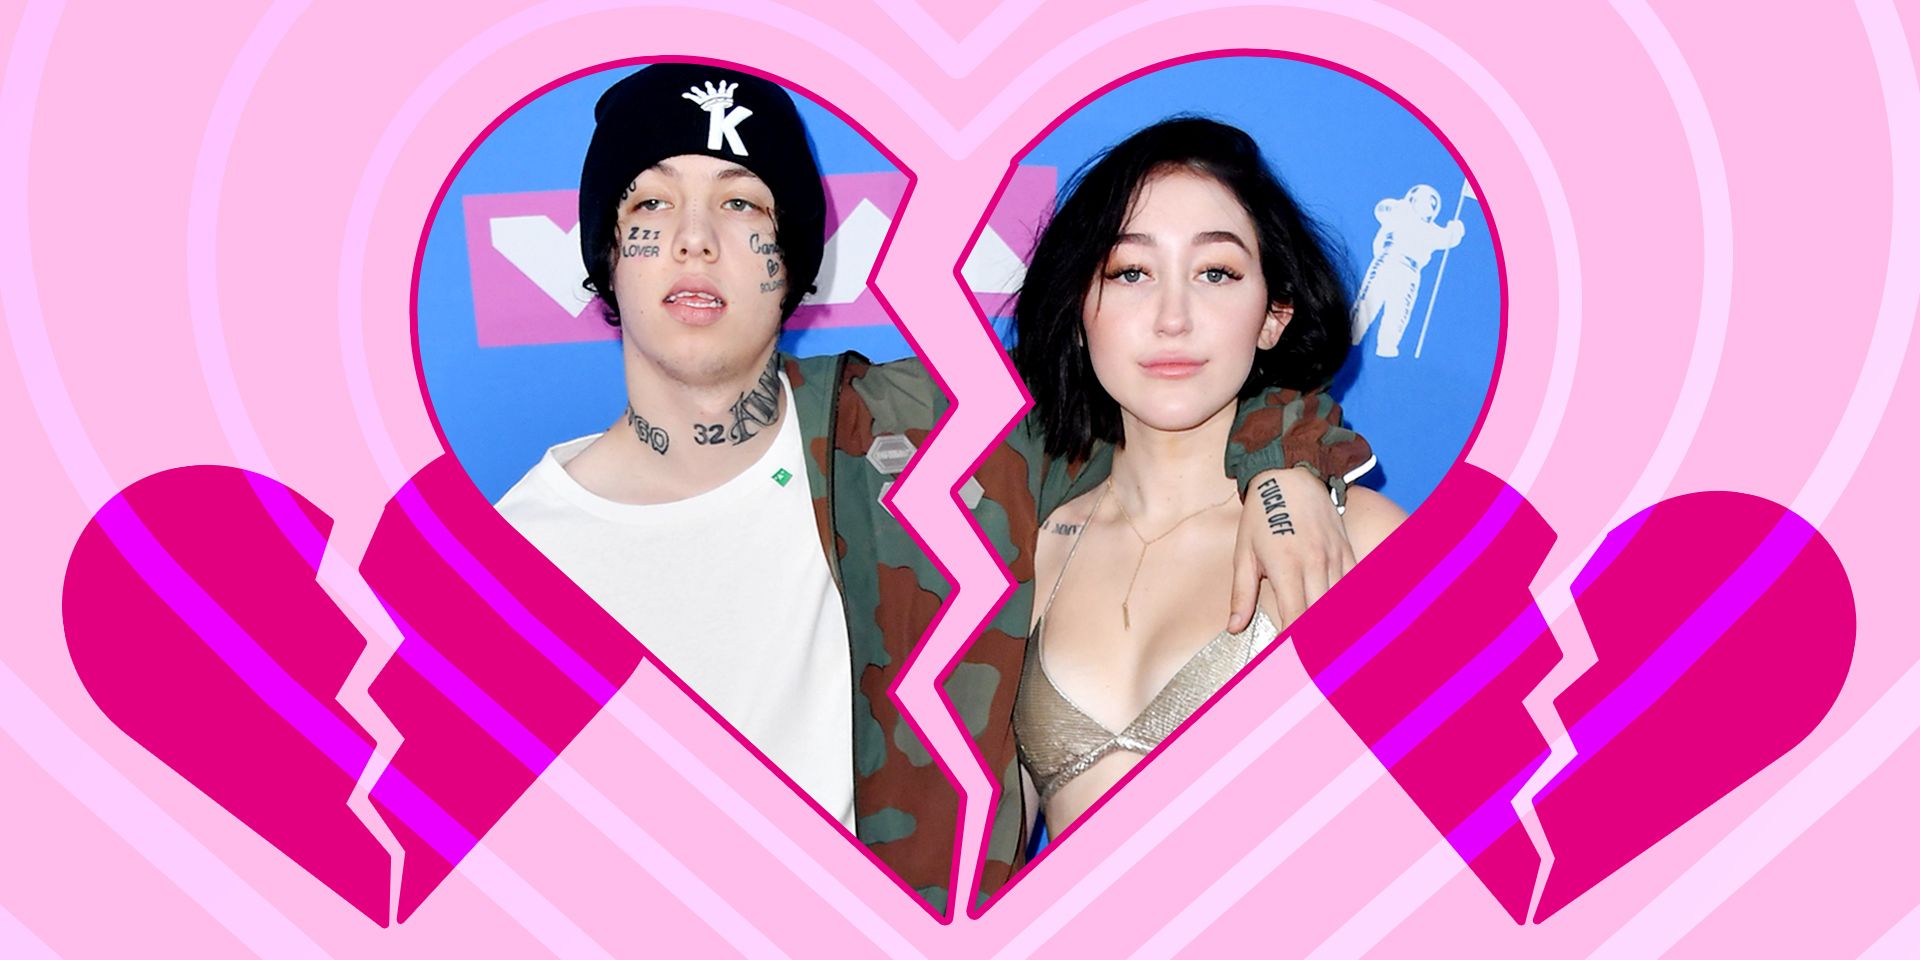 Noah Cyrus And Lil Xan Relationship Timeline All The Drama